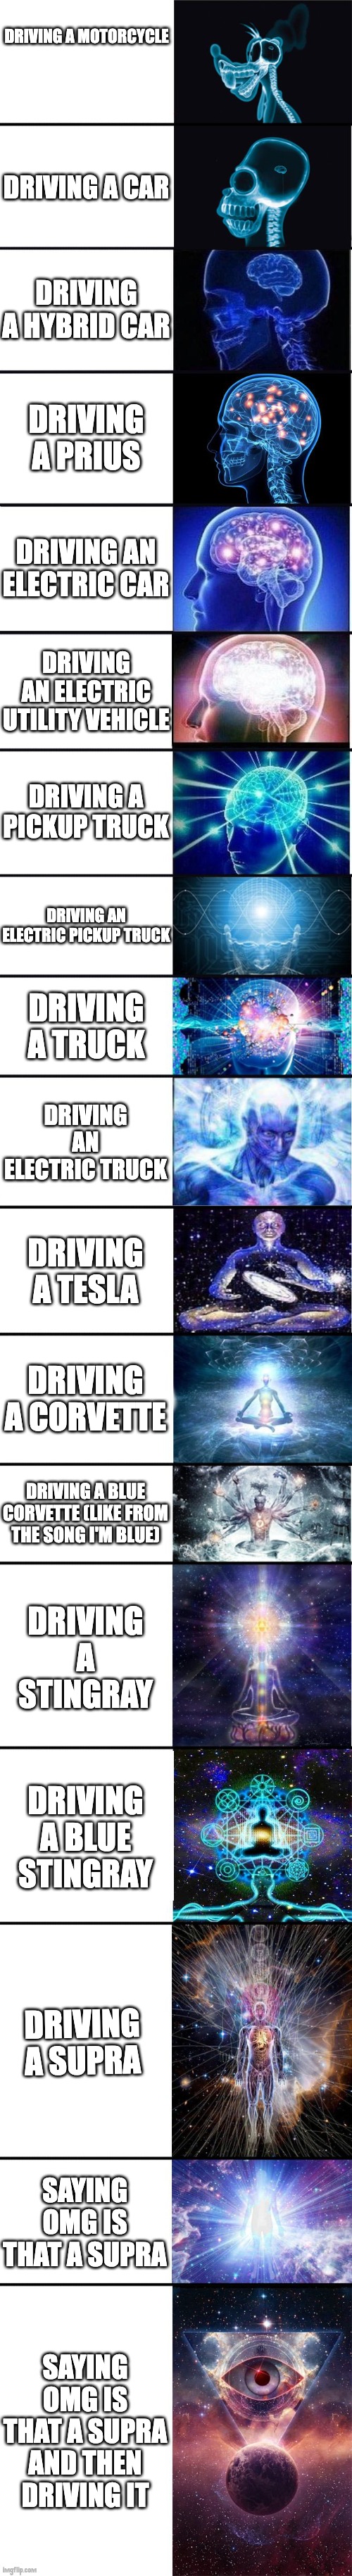 cars in a nutshell | DRIVING A MOTORCYCLE; DRIVING A CAR; DRIVING A HYBRID CAR; DRIVING A PRIUS; DRIVING AN ELECTRIC CAR; DRIVING AN ELECTRIC UTILITY VEHICLE; DRIVING A PICKUP TRUCK; DRIVING AN ELECTRIC PICKUP TRUCK; DRIVING A TRUCK; DRIVING AN ELECTRIC TRUCK; DRIVING A TESLA; DRIVING A CORVETTE; DRIVING A BLUE CORVETTE (LIKE FROM THE SONG I'M BLUE); DRIVING A STINGRAY; DRIVING A BLUE STINGRAY; DRIVING A SUPRA; SAYING OMG IS THAT A SUPRA; SAYING OMG IS THAT A SUPRA AND THEN DRIVING IT | image tagged in expanding brain 9001 | made w/ Imgflip meme maker